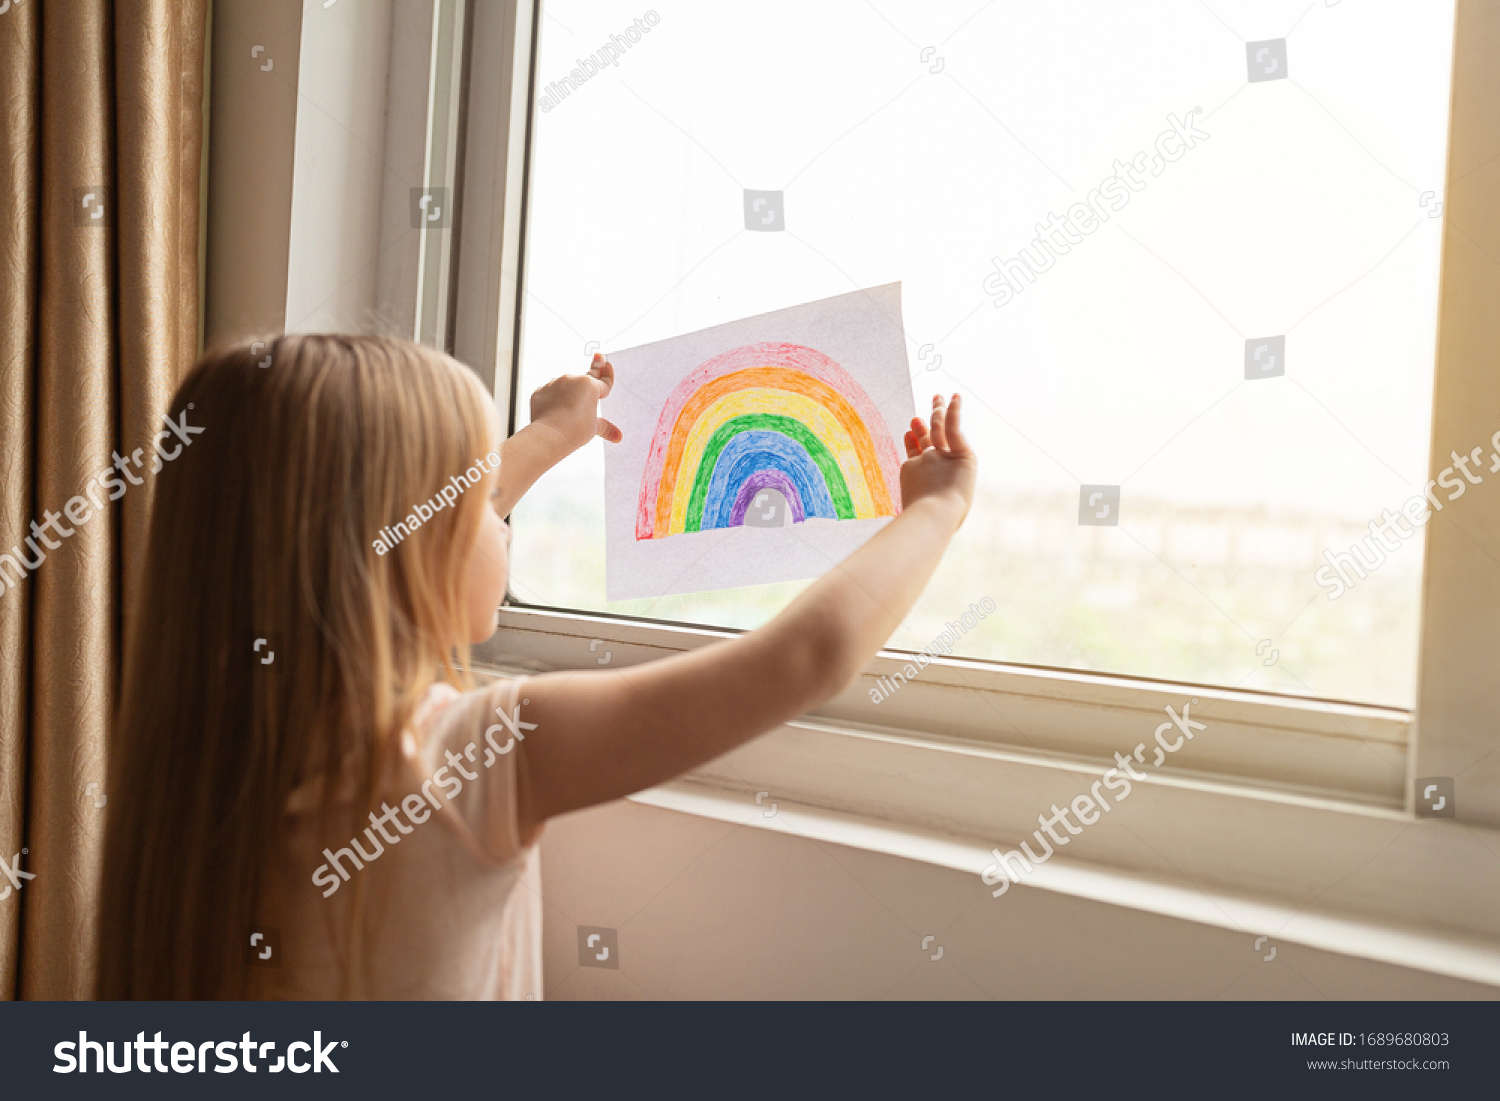 Kid painting rainbow during Covid-19 quarantine at home. Girl near window. Stay at home Social media campaign for coronavirus prevention, let's all be well, hope during coronavirus pandemic concept #1689680803